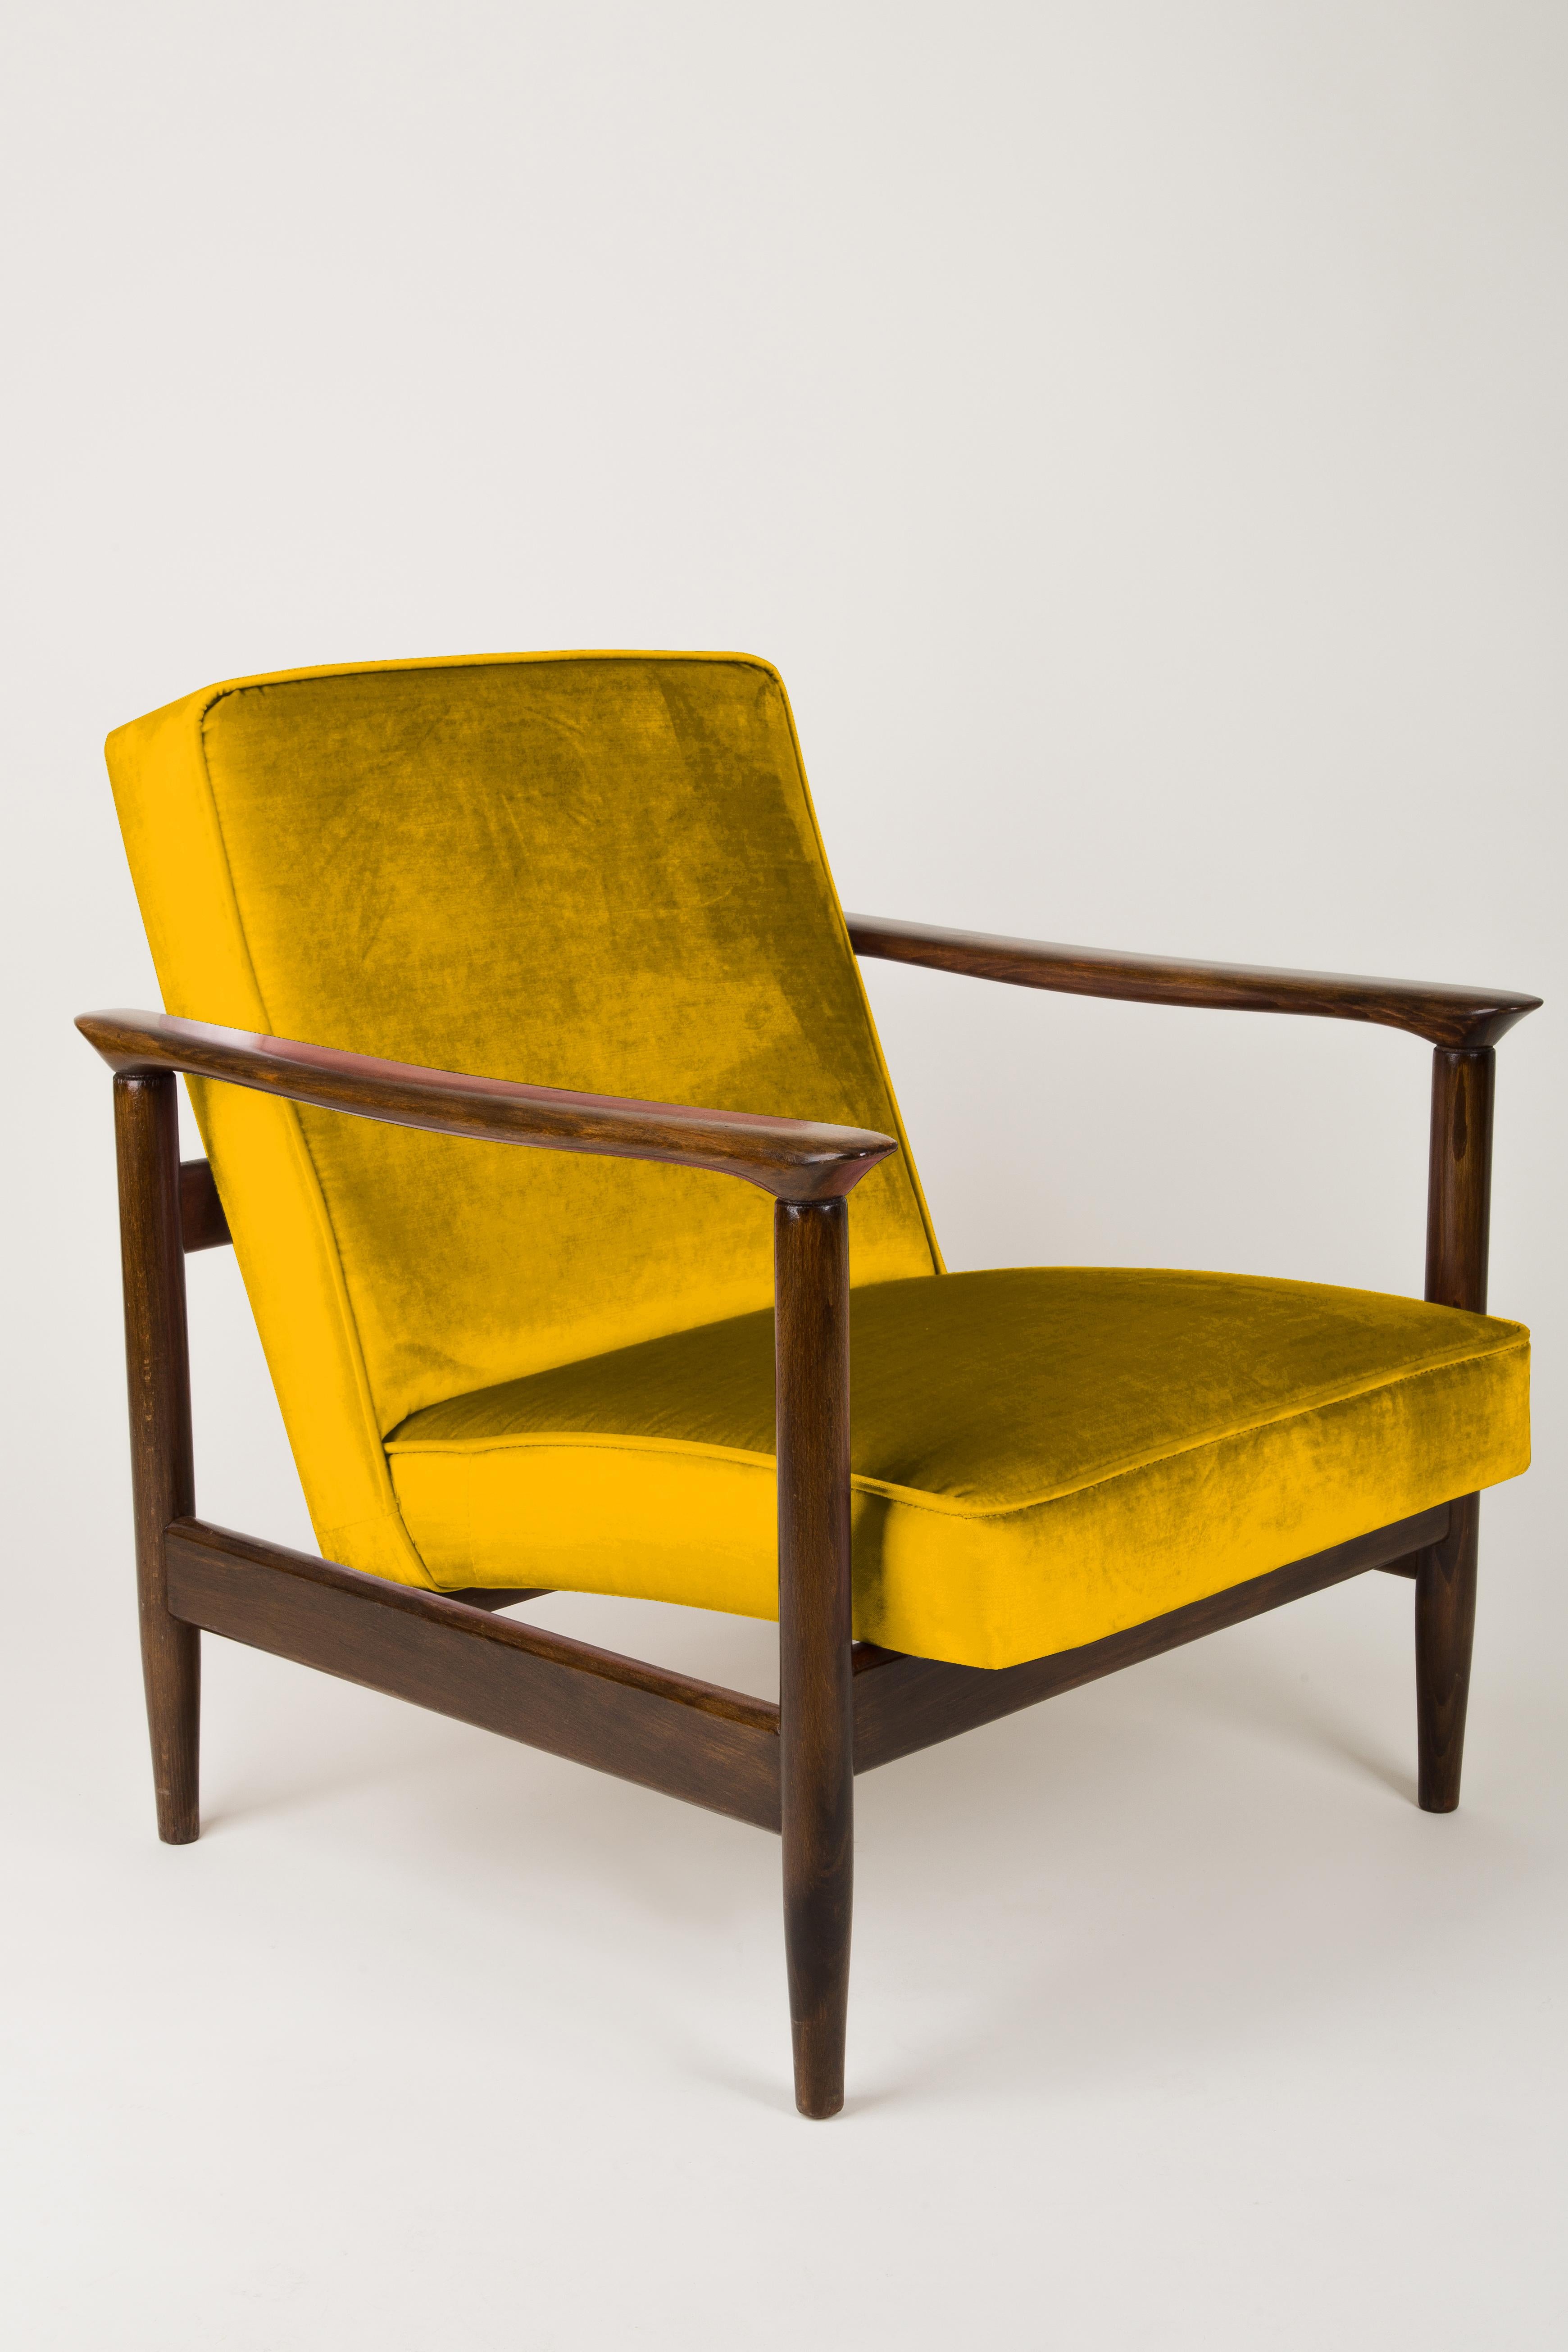 Mid-Century Modern Pair of Yellow Armchairs, Edmund Homa, GFM-142, 1960s, Poland For Sale